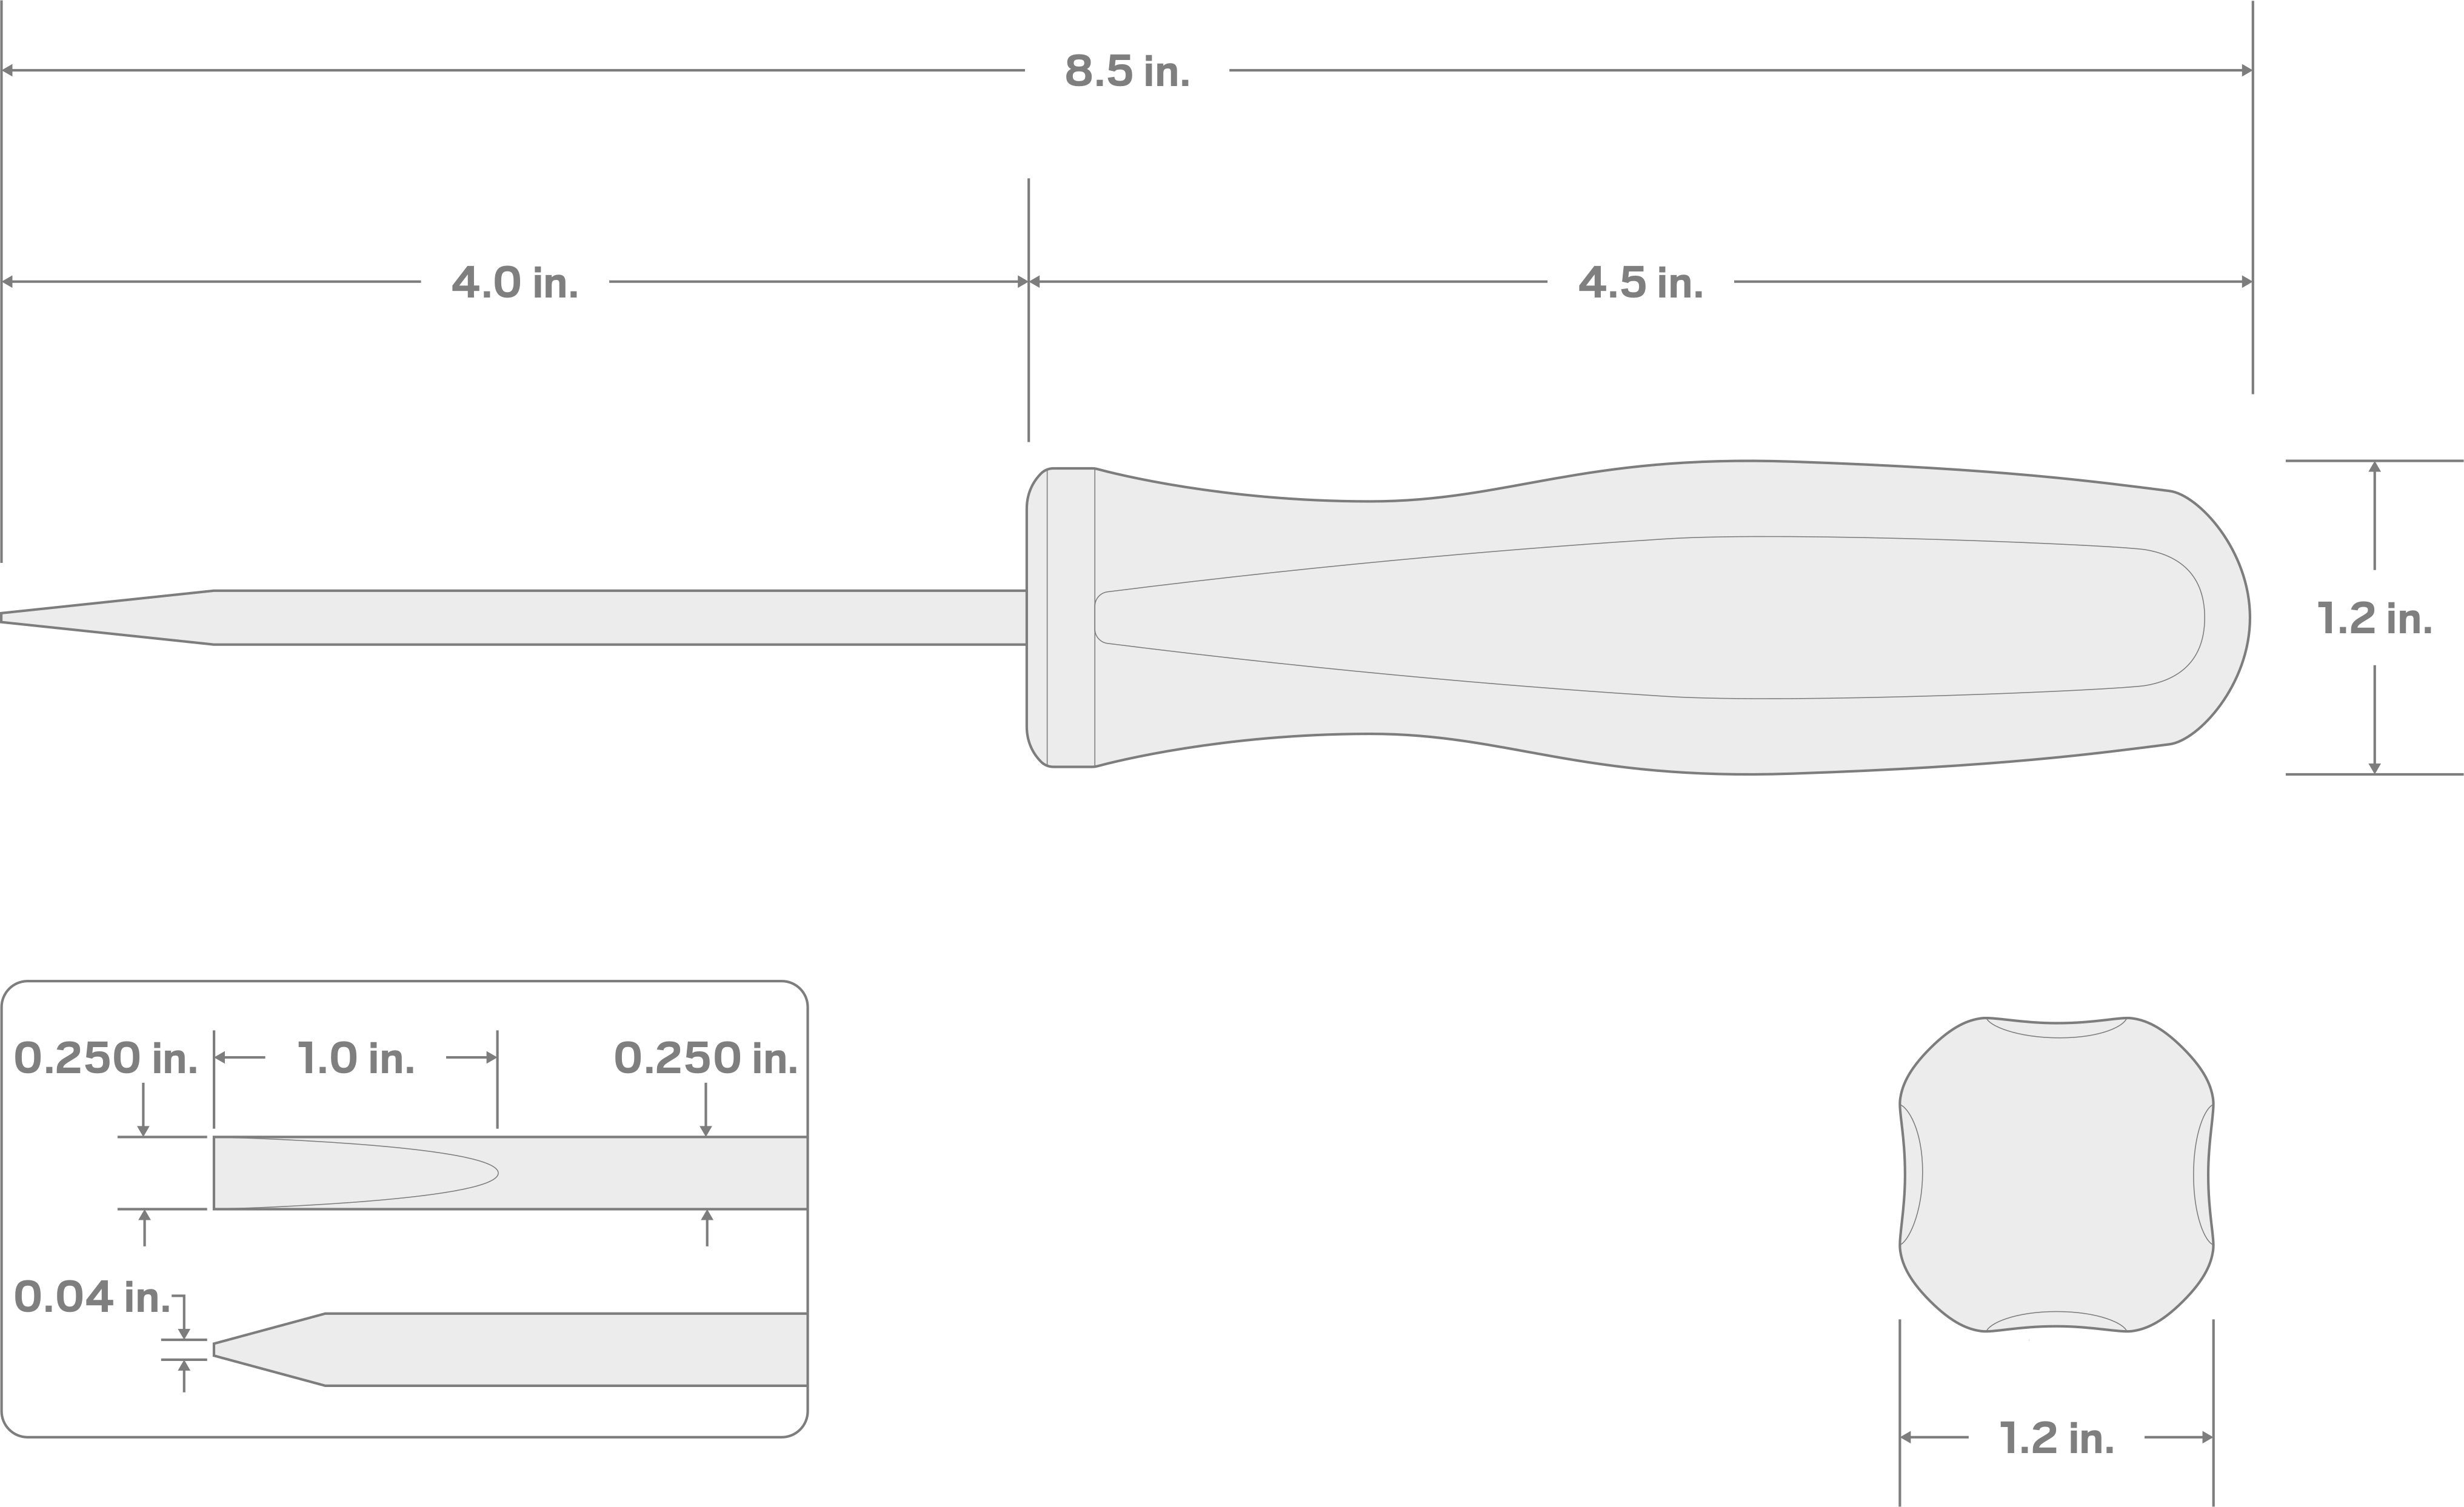 Specs for 1/4 Inch Slotted Hard Handle Screwdriver